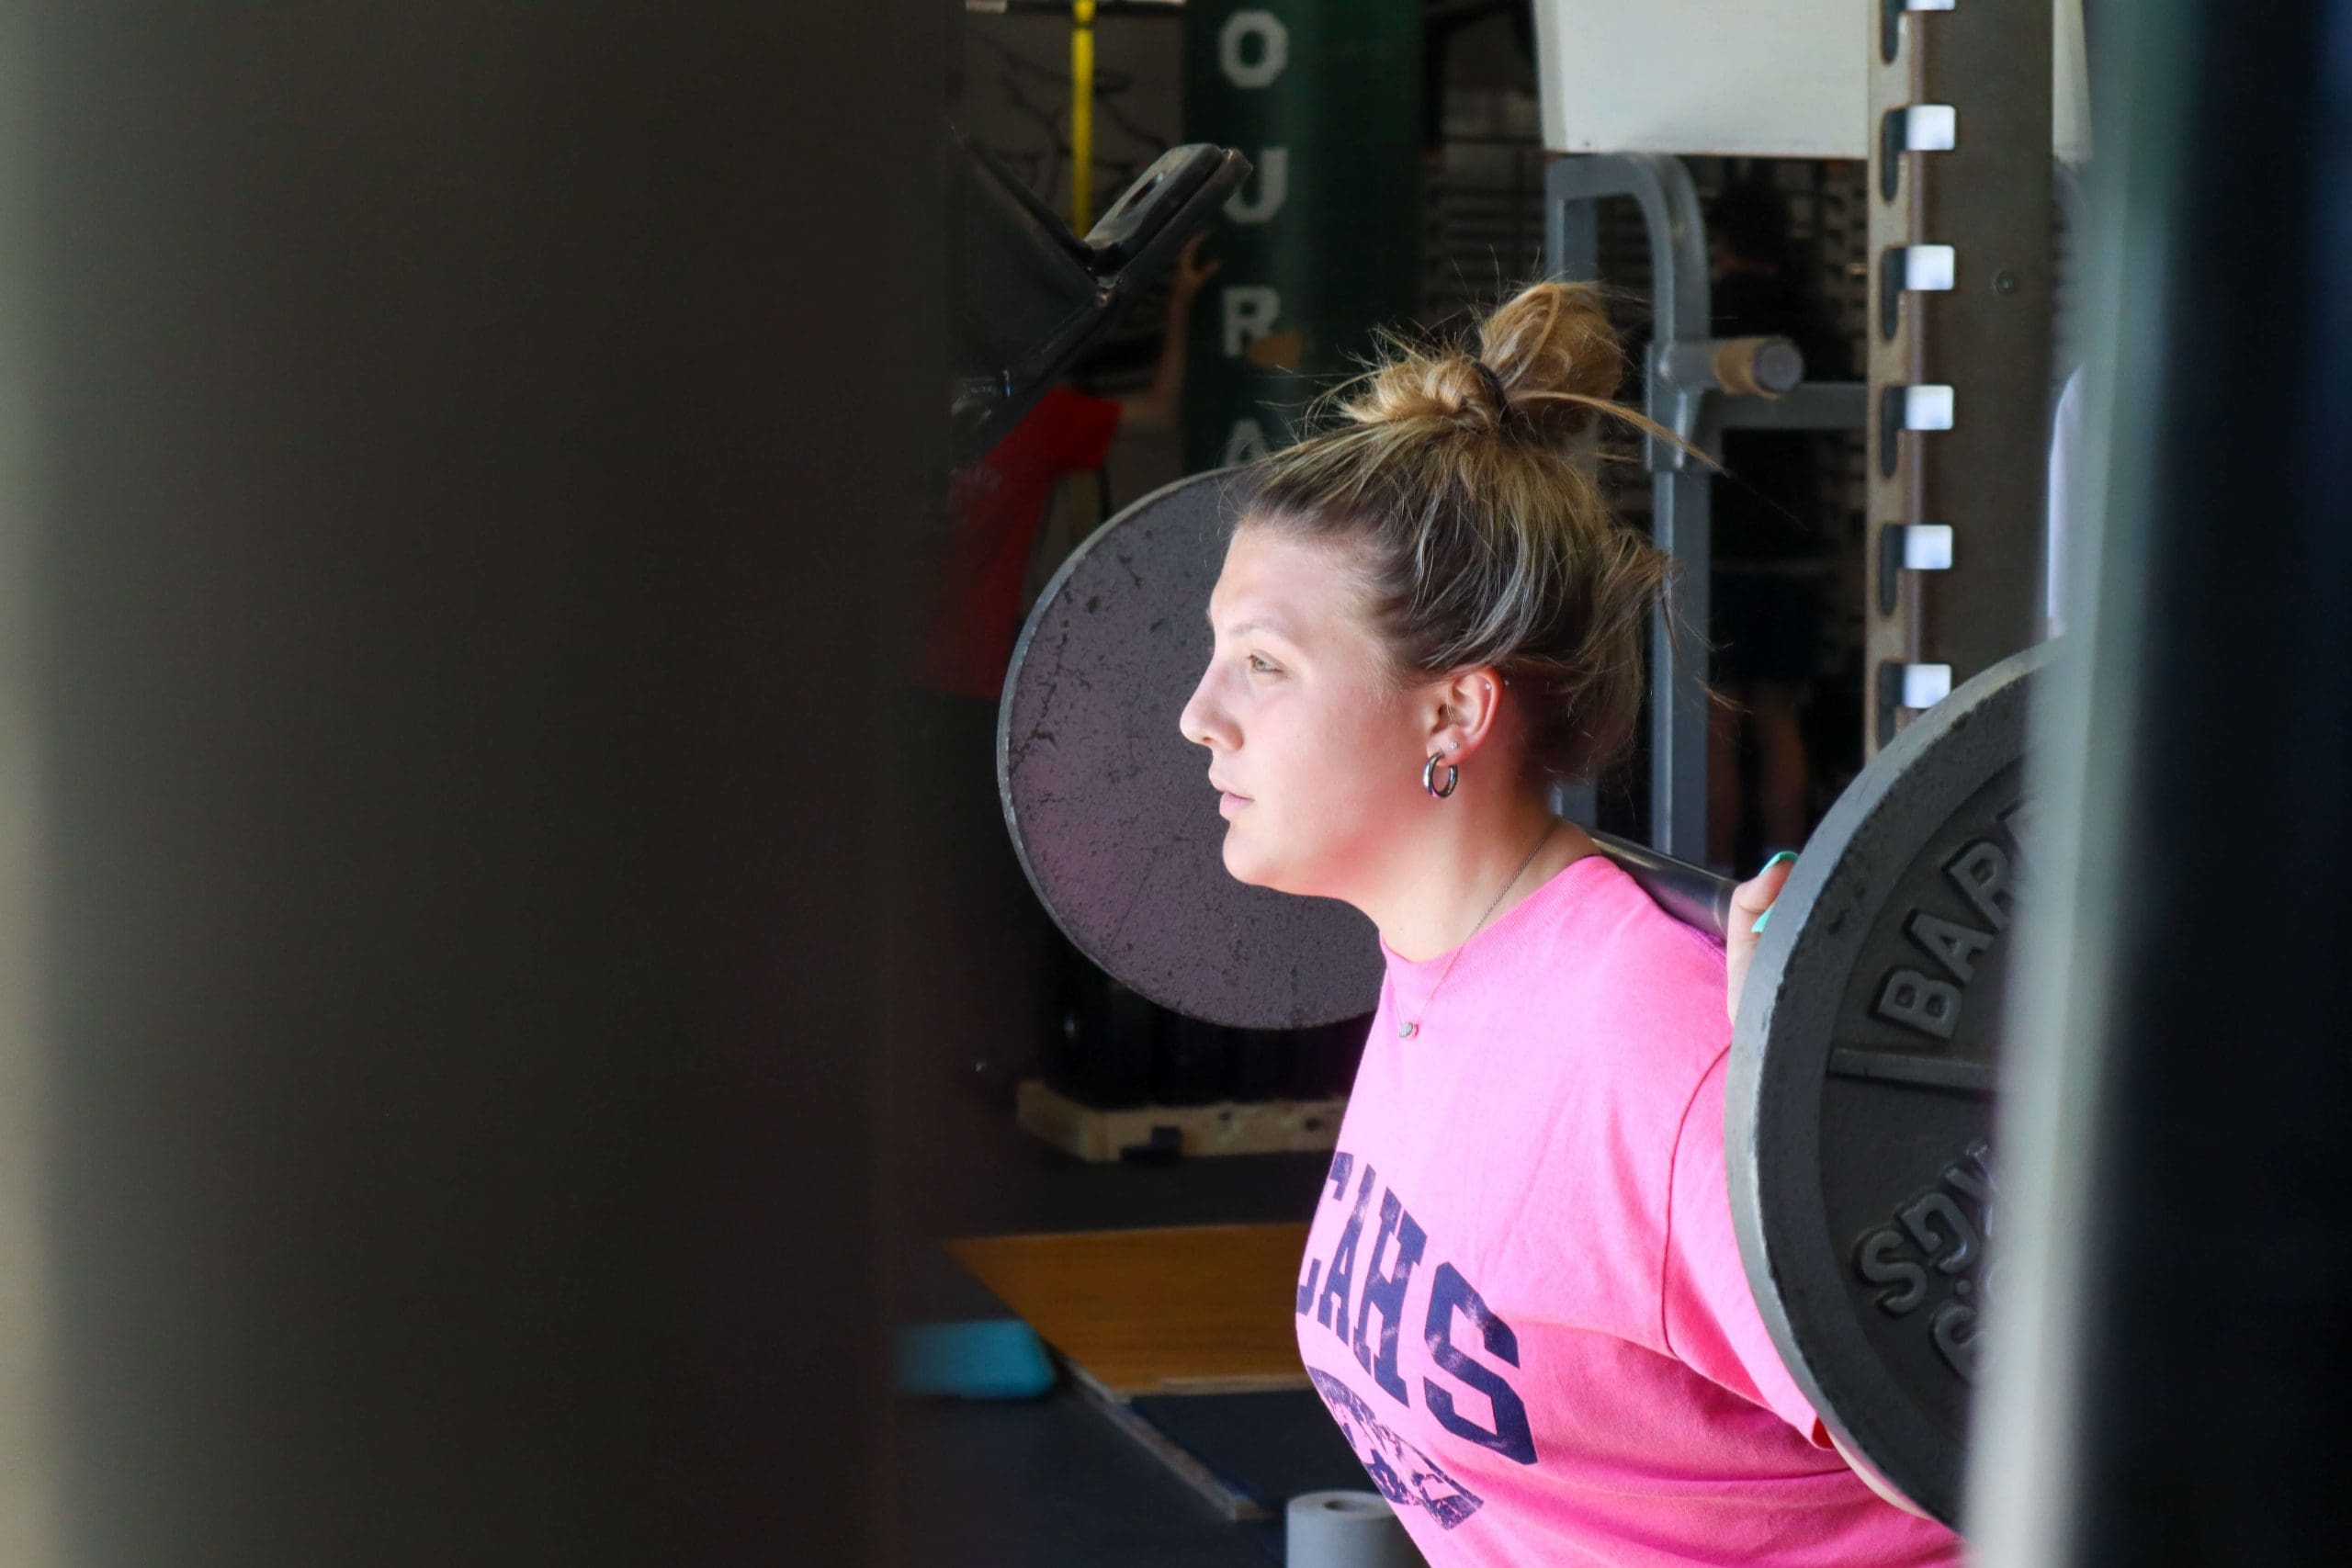 A student performs a barbell back squat in physical education class.